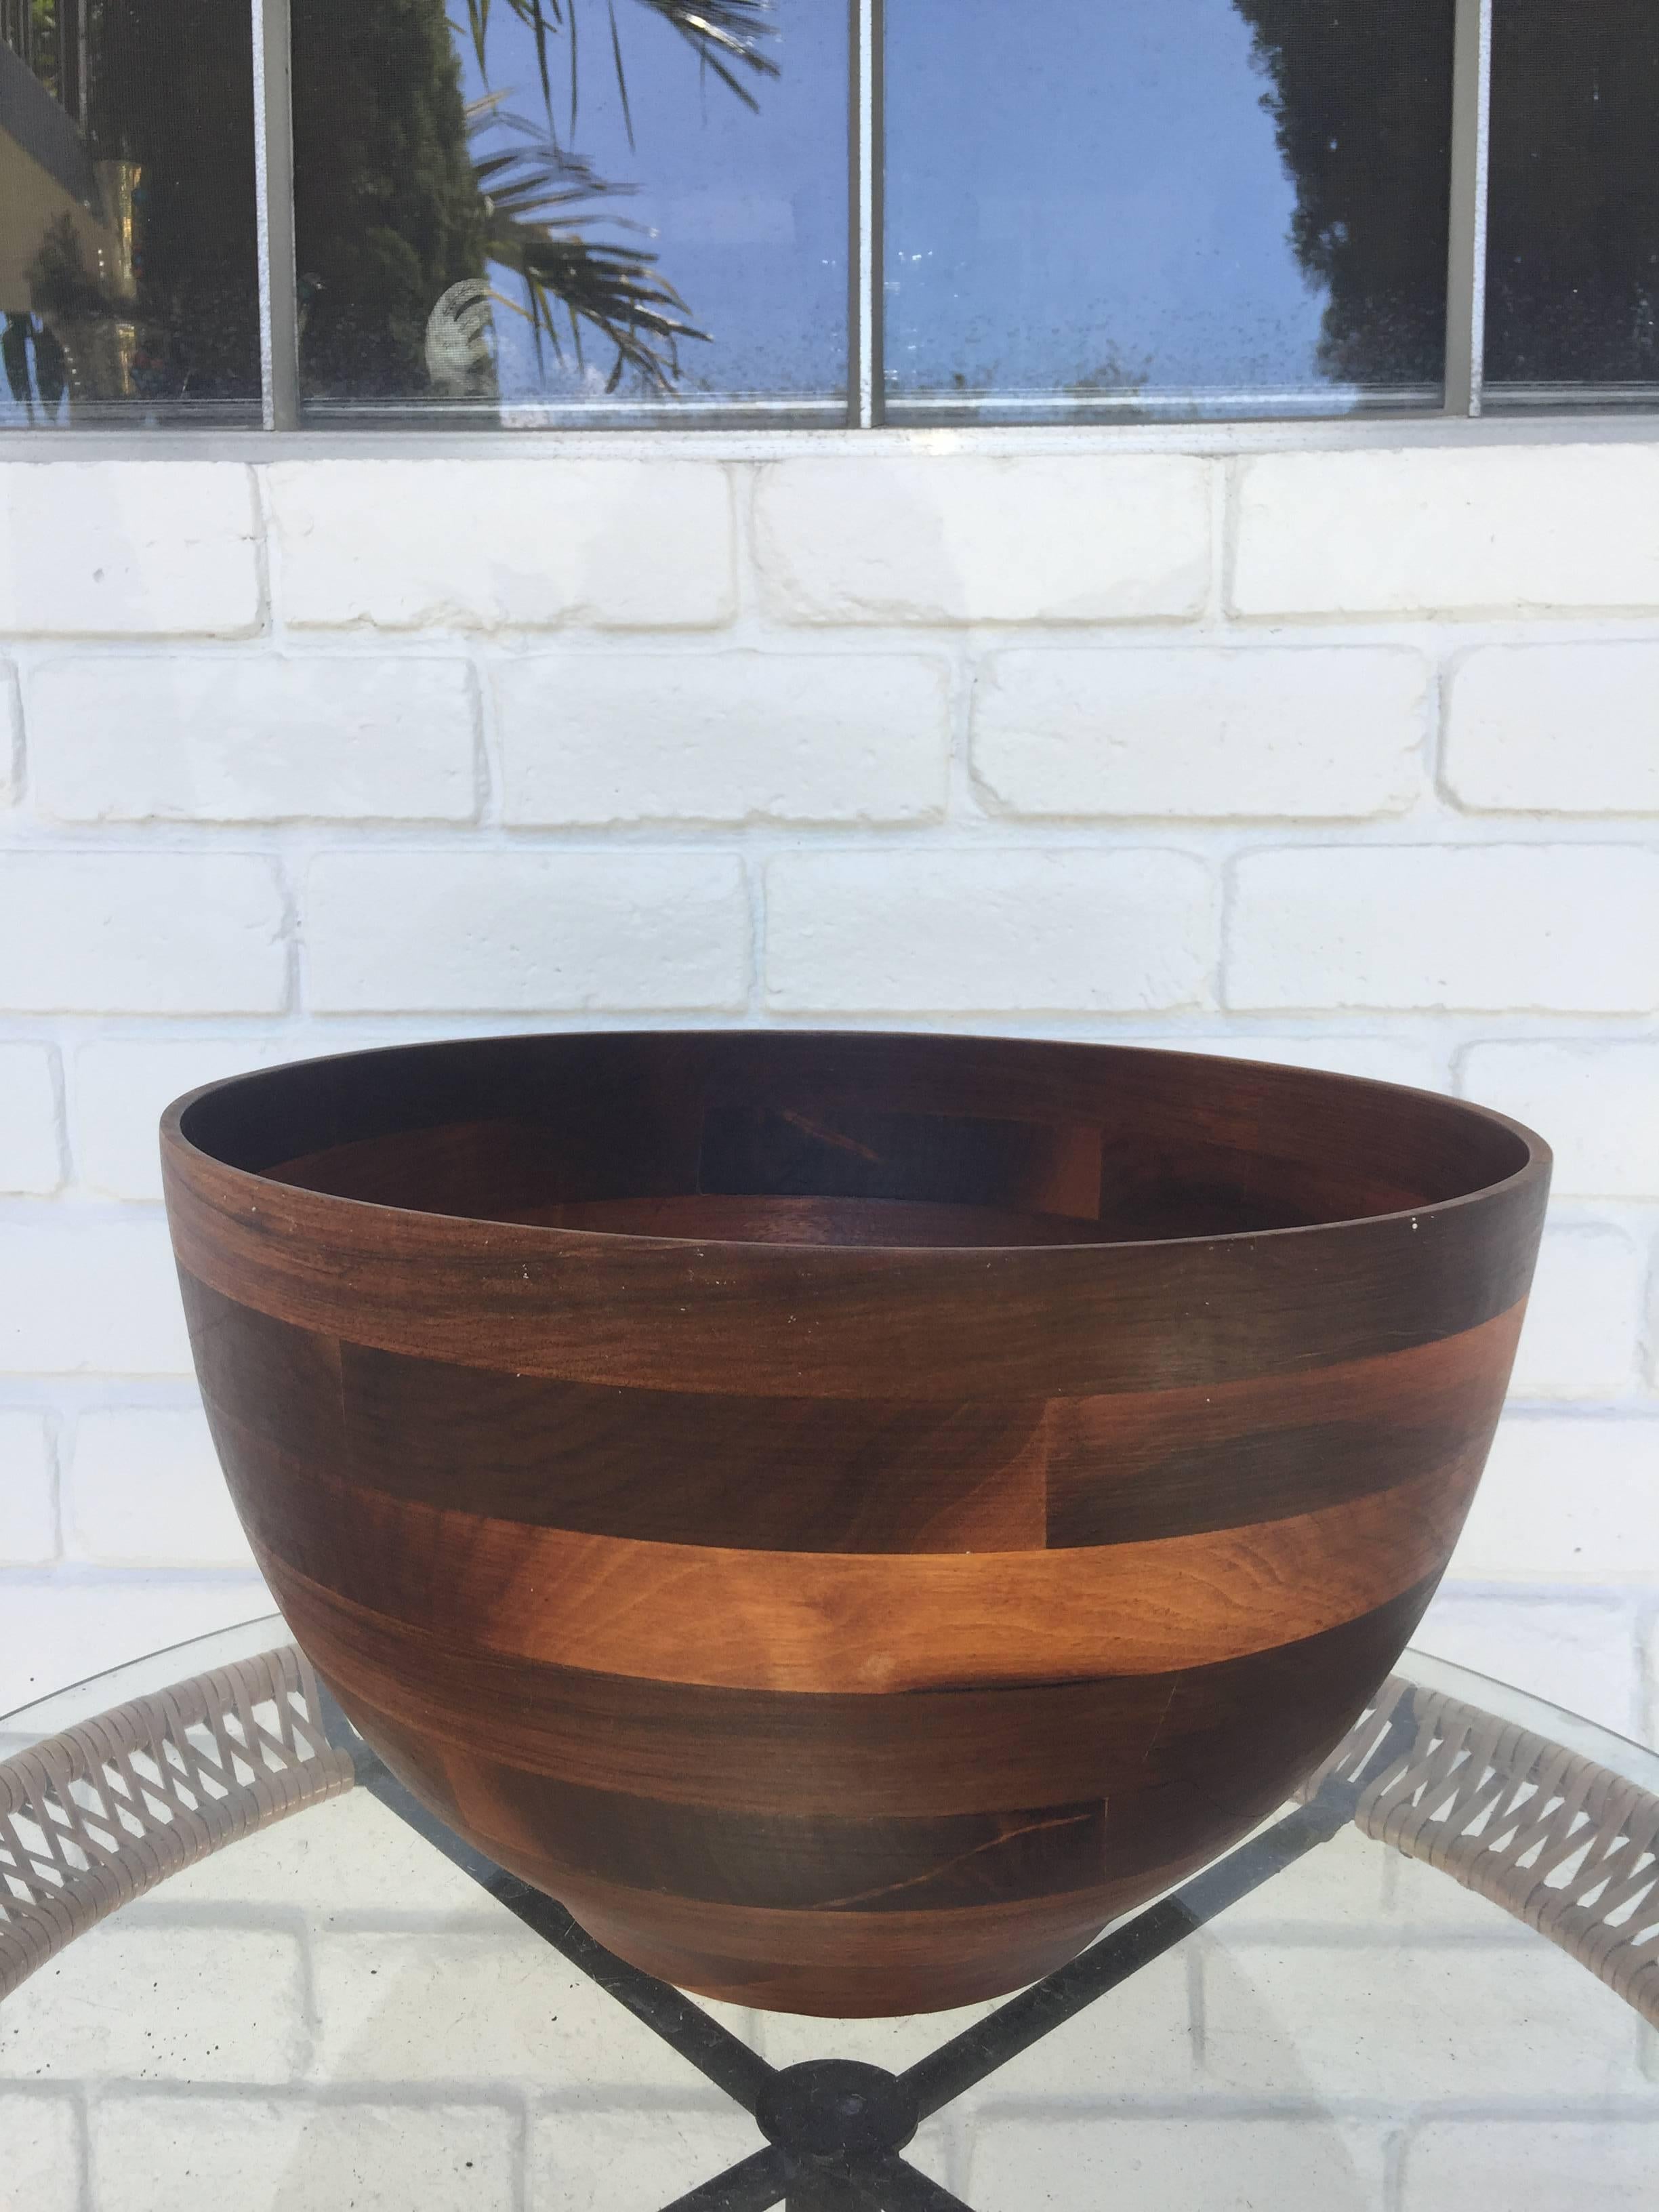 A most beautiful Danish modern style salad bowl.
This bowl has a grand scale and a sculptural appearance.
Beautifully fitted with custom serving tools specifically made for this bowl by the same artist.
The bowl is grand in scale.
Piece has